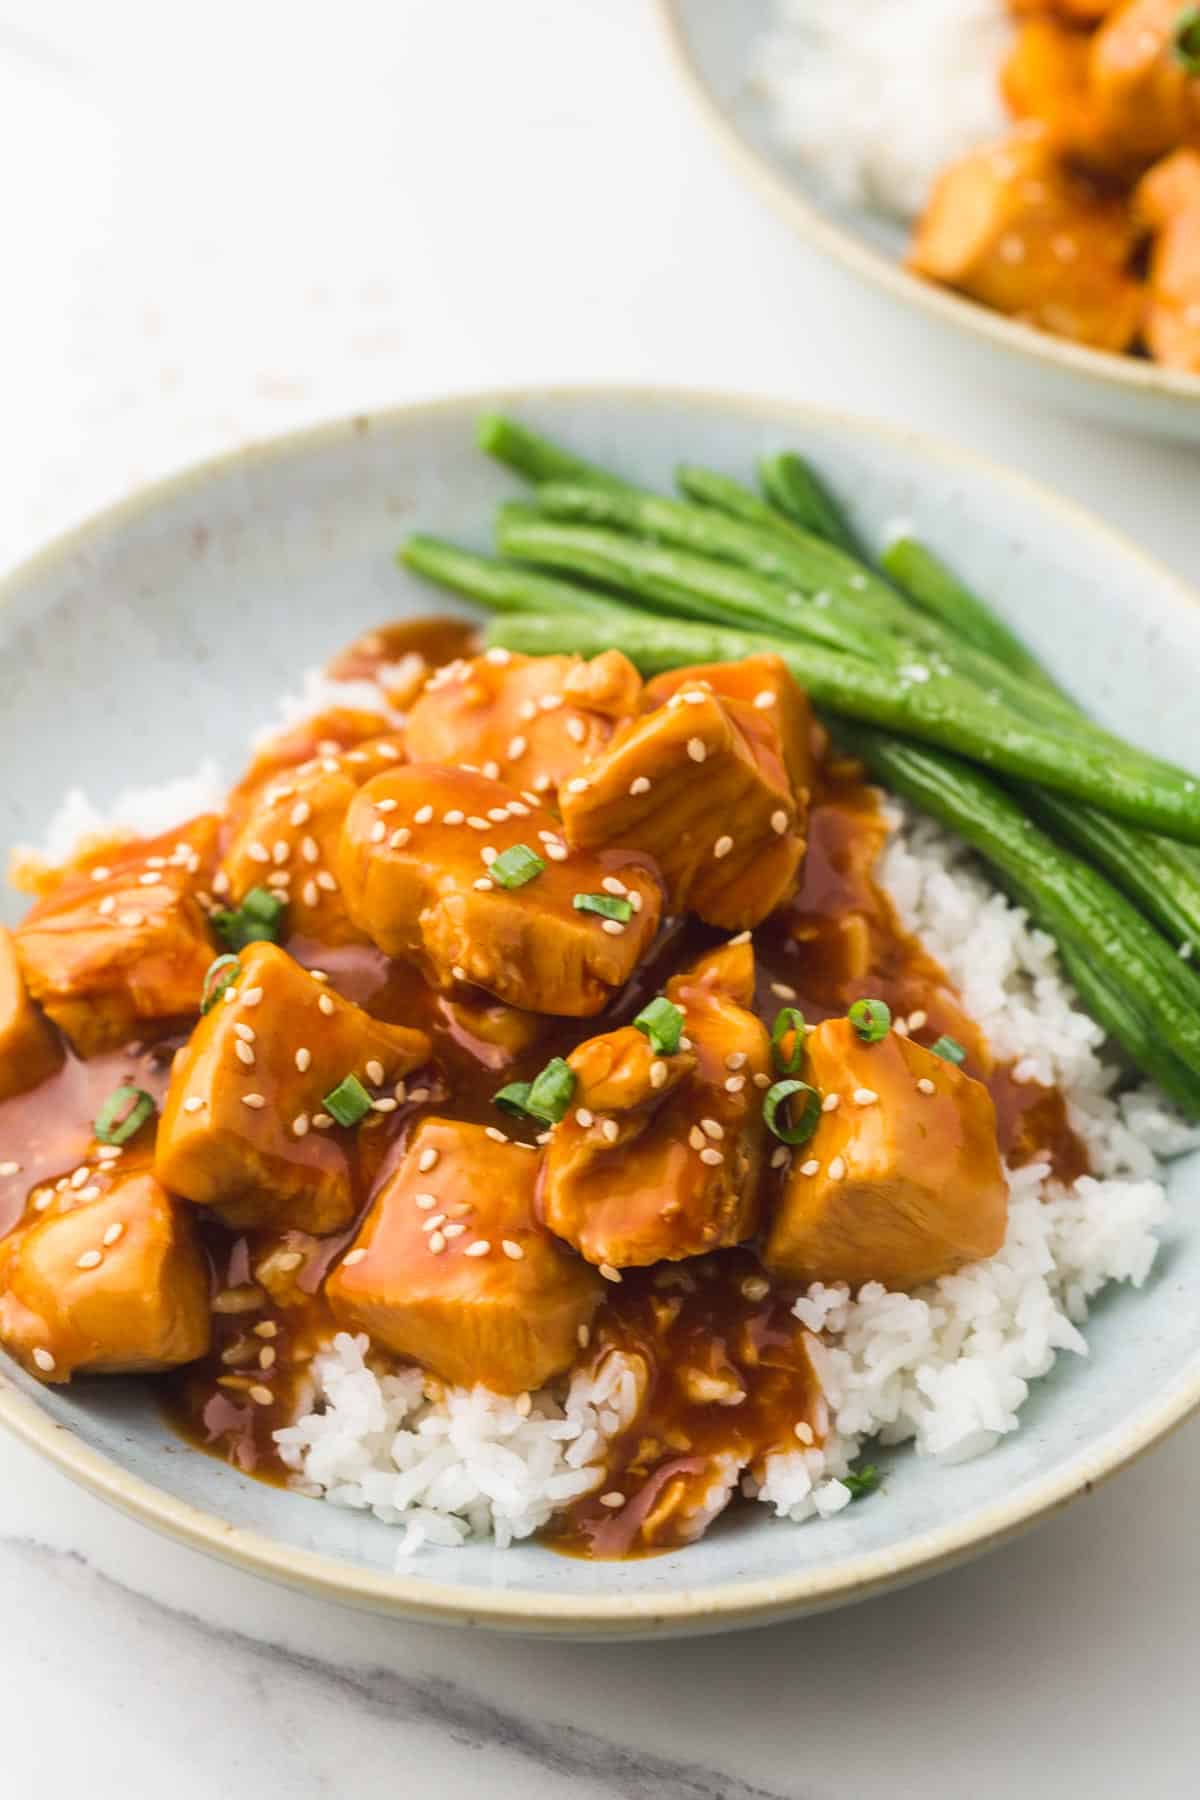 Instant Pot Honey Garlic Chicken in a bowl, served over jasmine rice, and green beans on the side